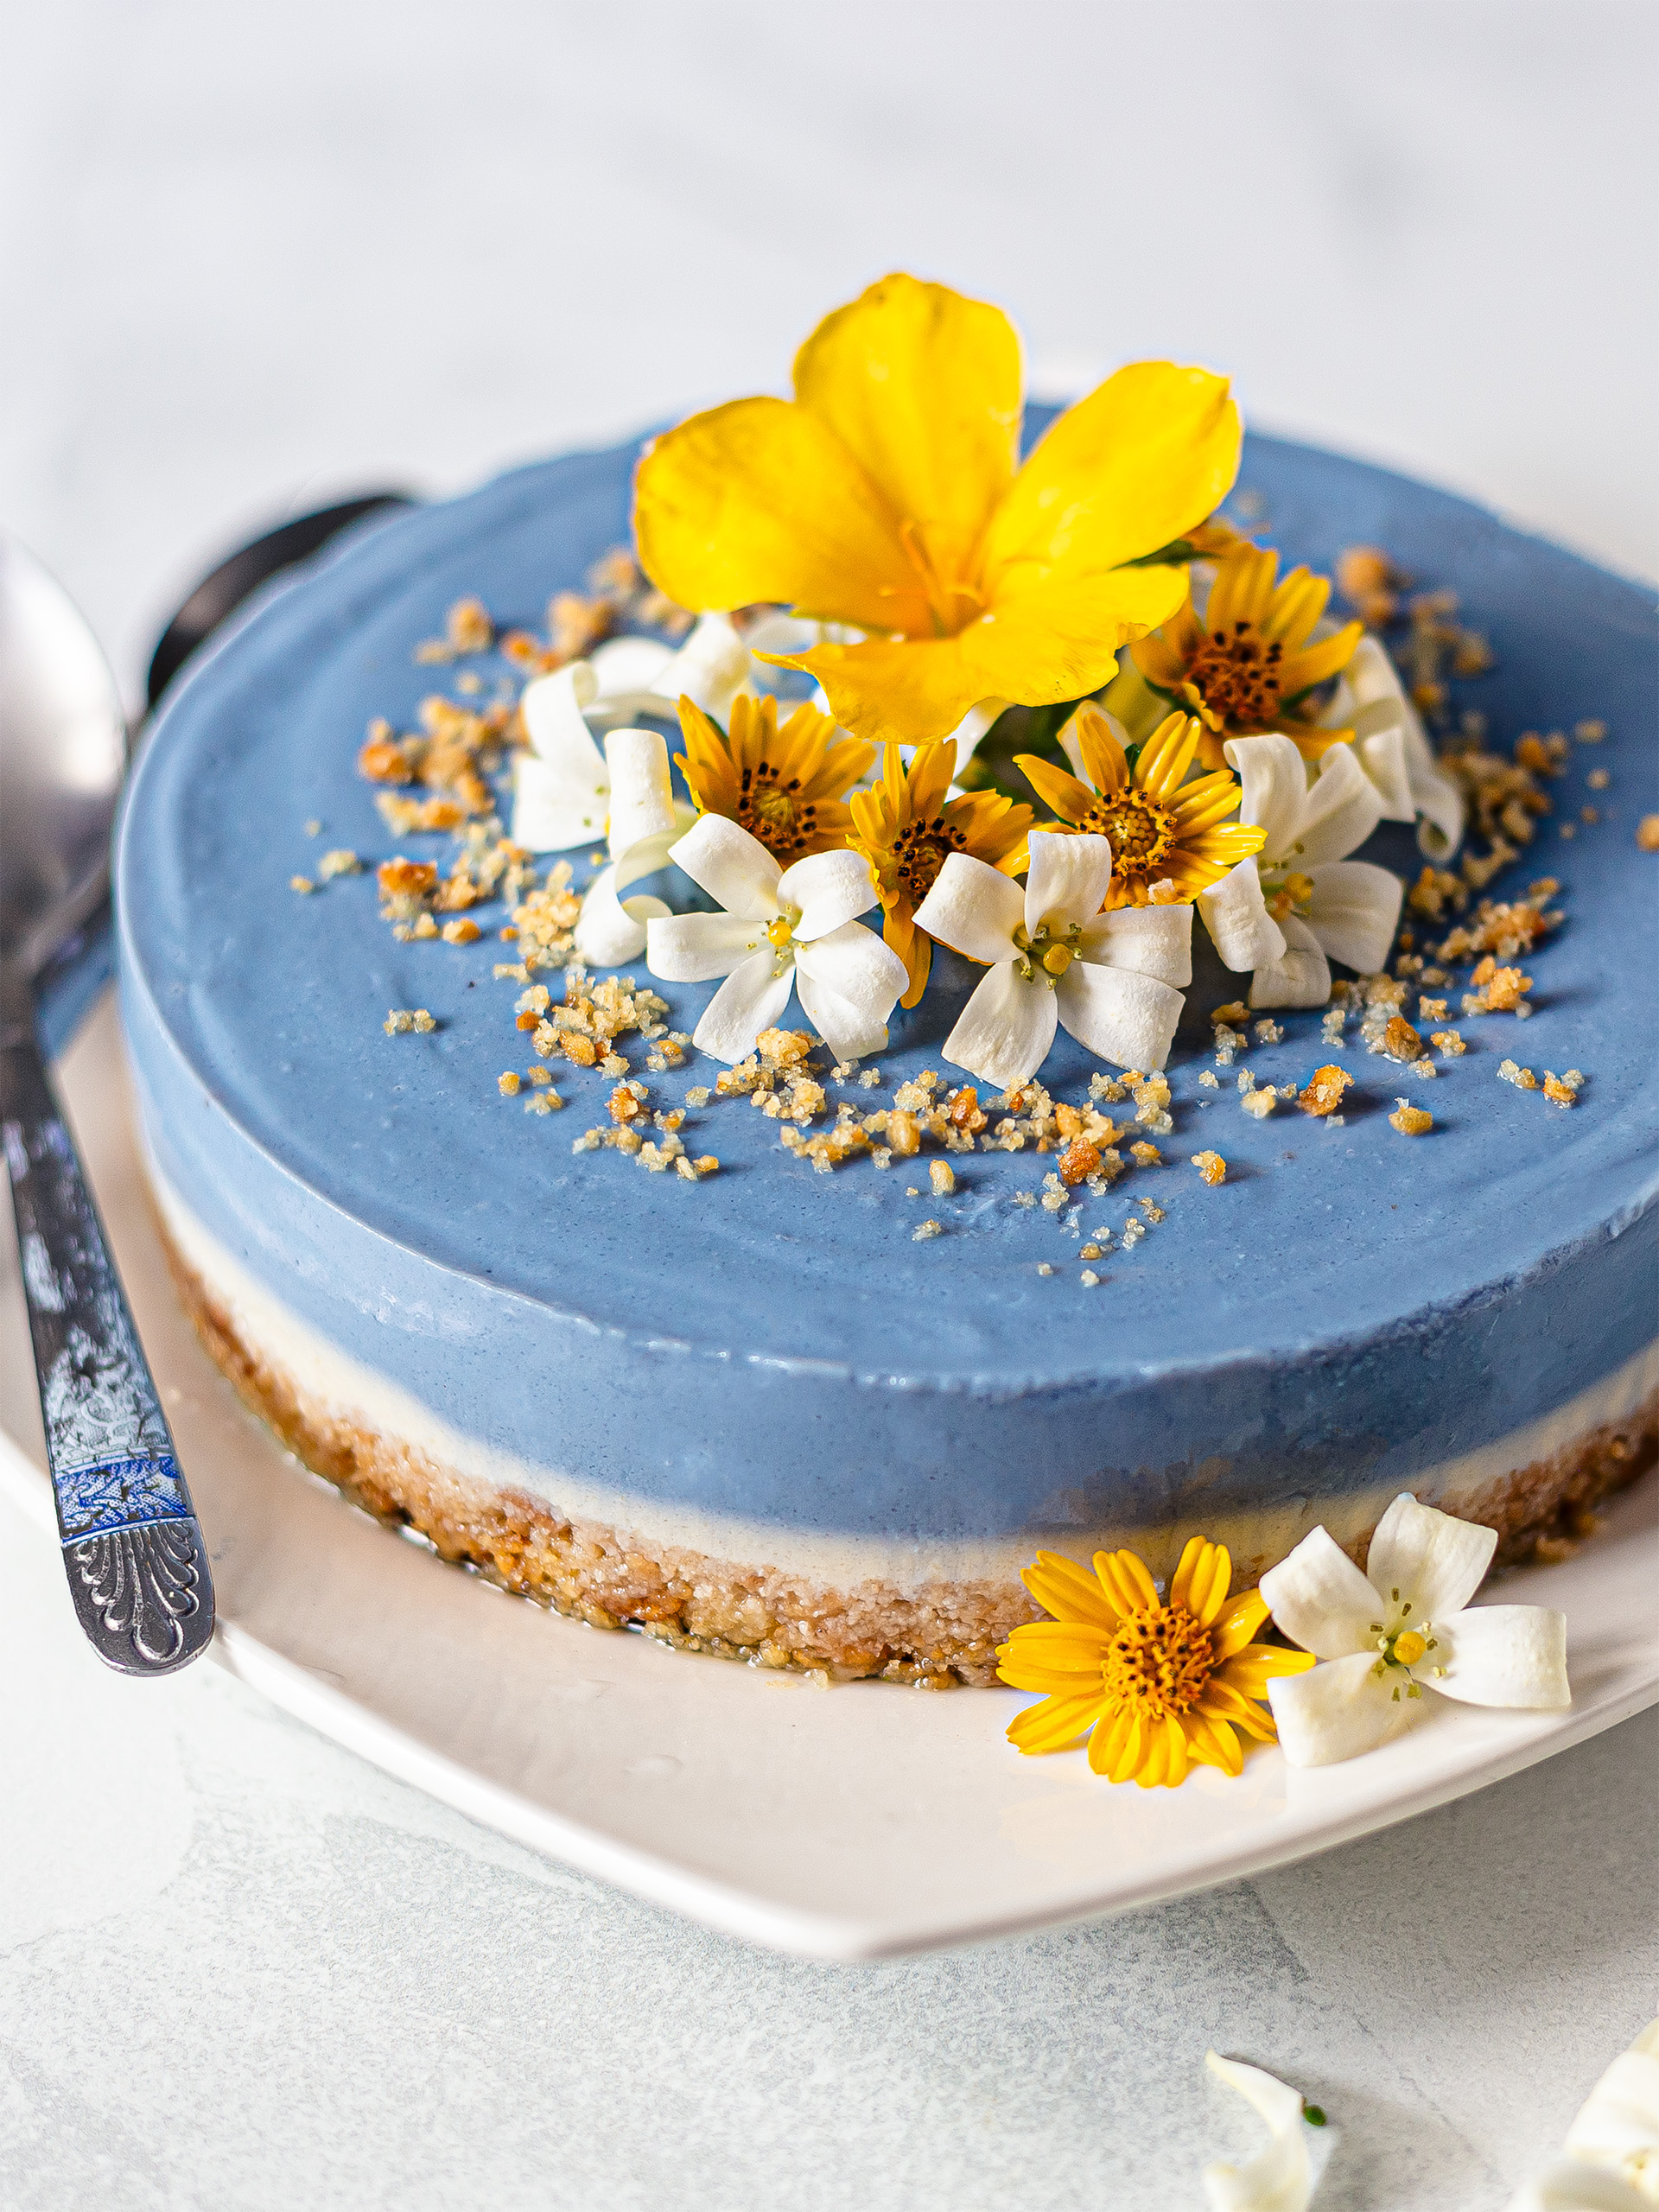 butterfly pea flower blue cheesecake on a plate